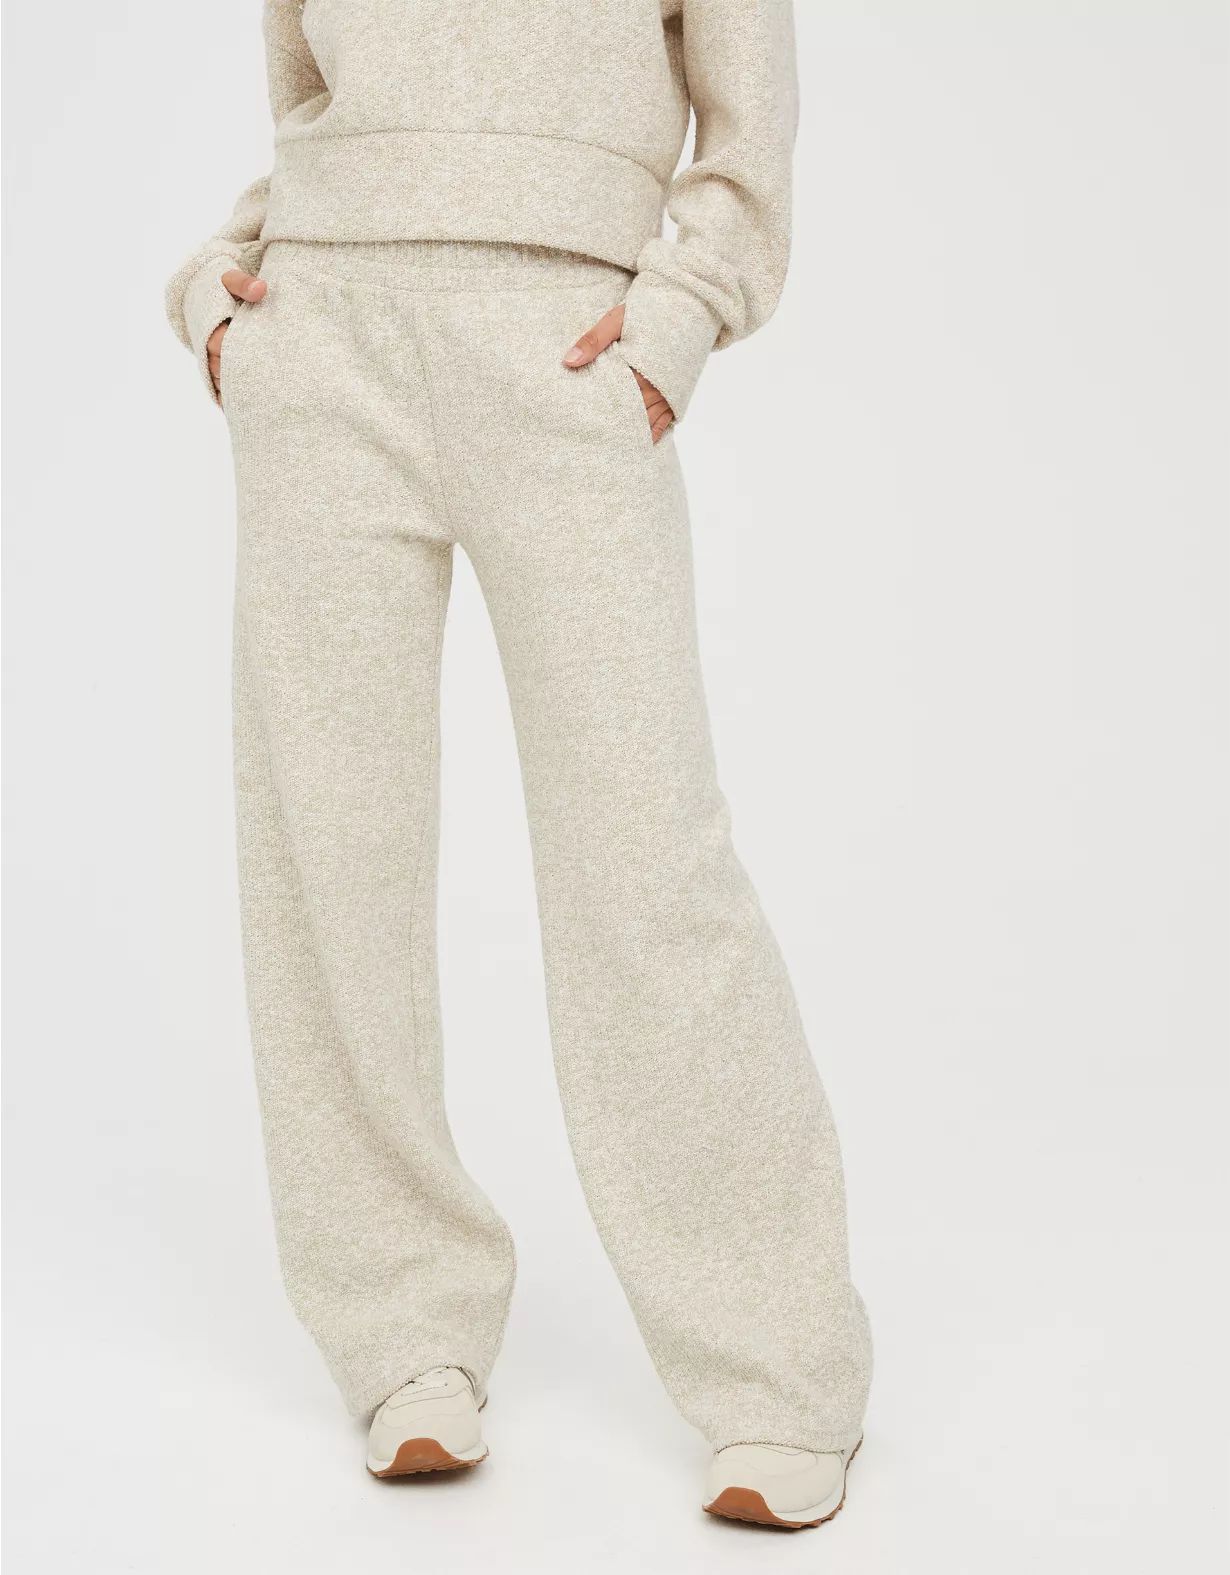 OFFLINE By Aerie Snowday Wide Leg Pant | Aerie